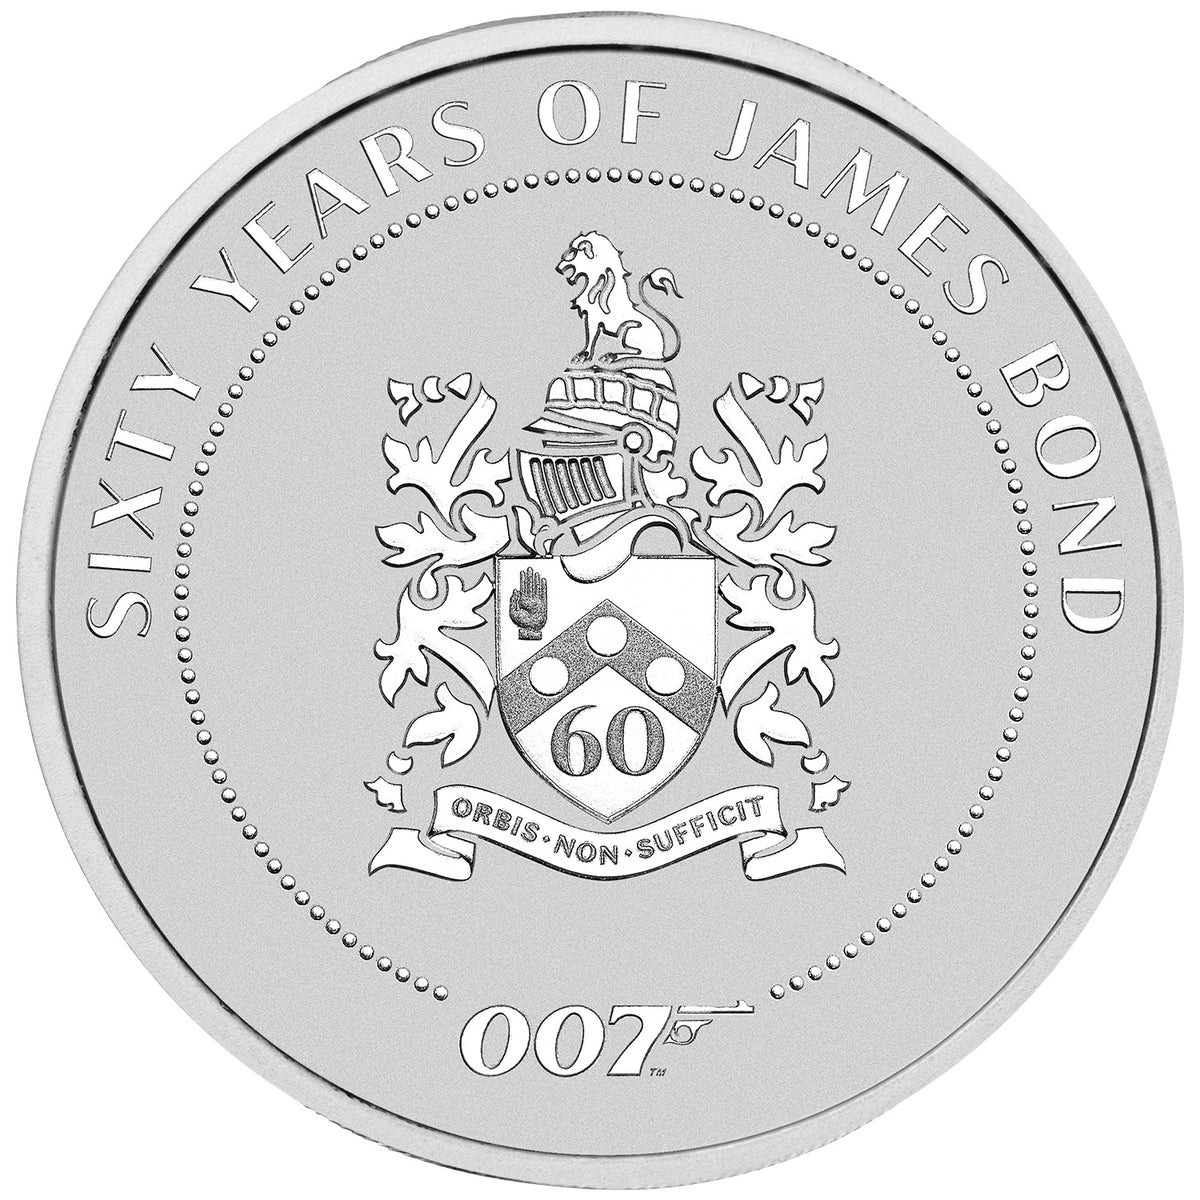 James Bond Family Crest 60th Anniversary 1oz Silver Coin - By The Perth Mint